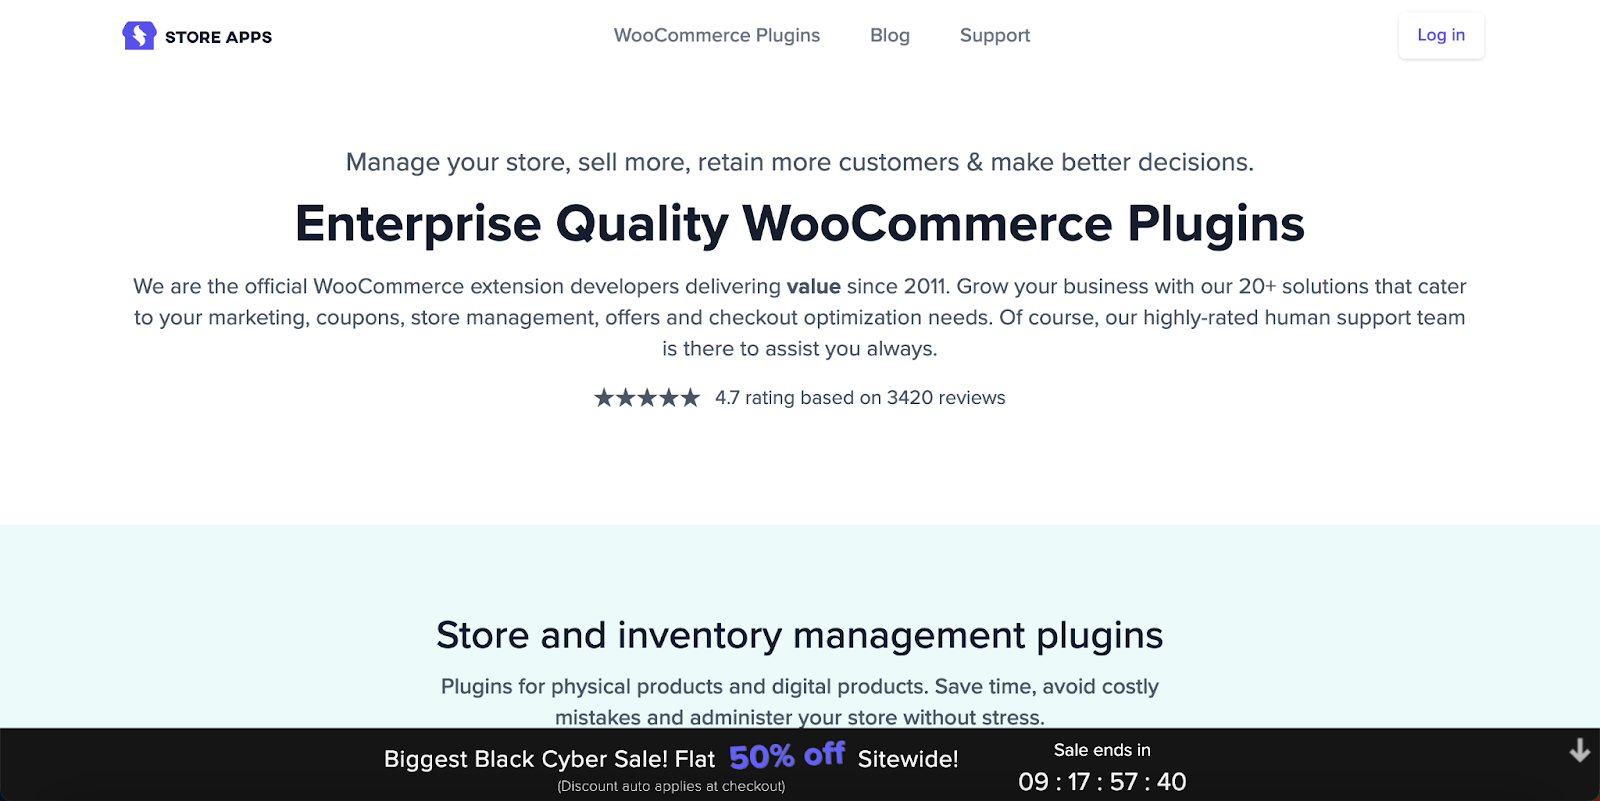 StoreApps' Black Friday and Cyber Monday Deals WordPress Plugin